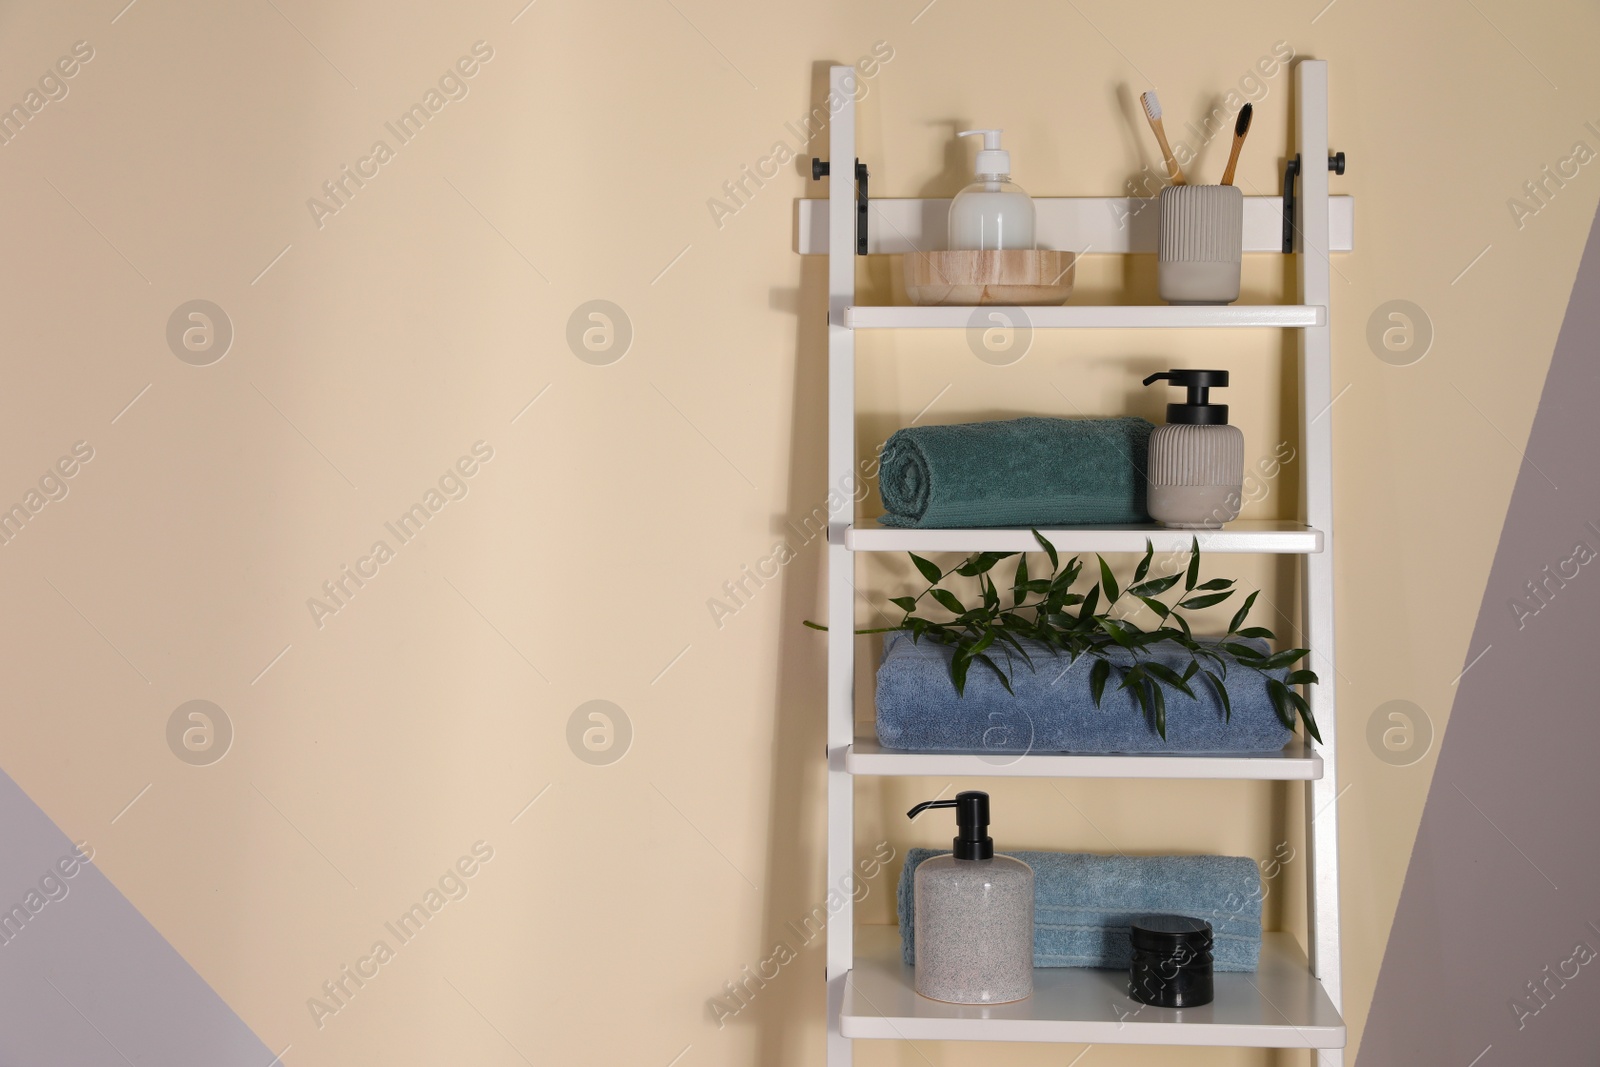 Photo of Shelving unit with toiletries near light wall indoors, space for text. Bathroom interior element